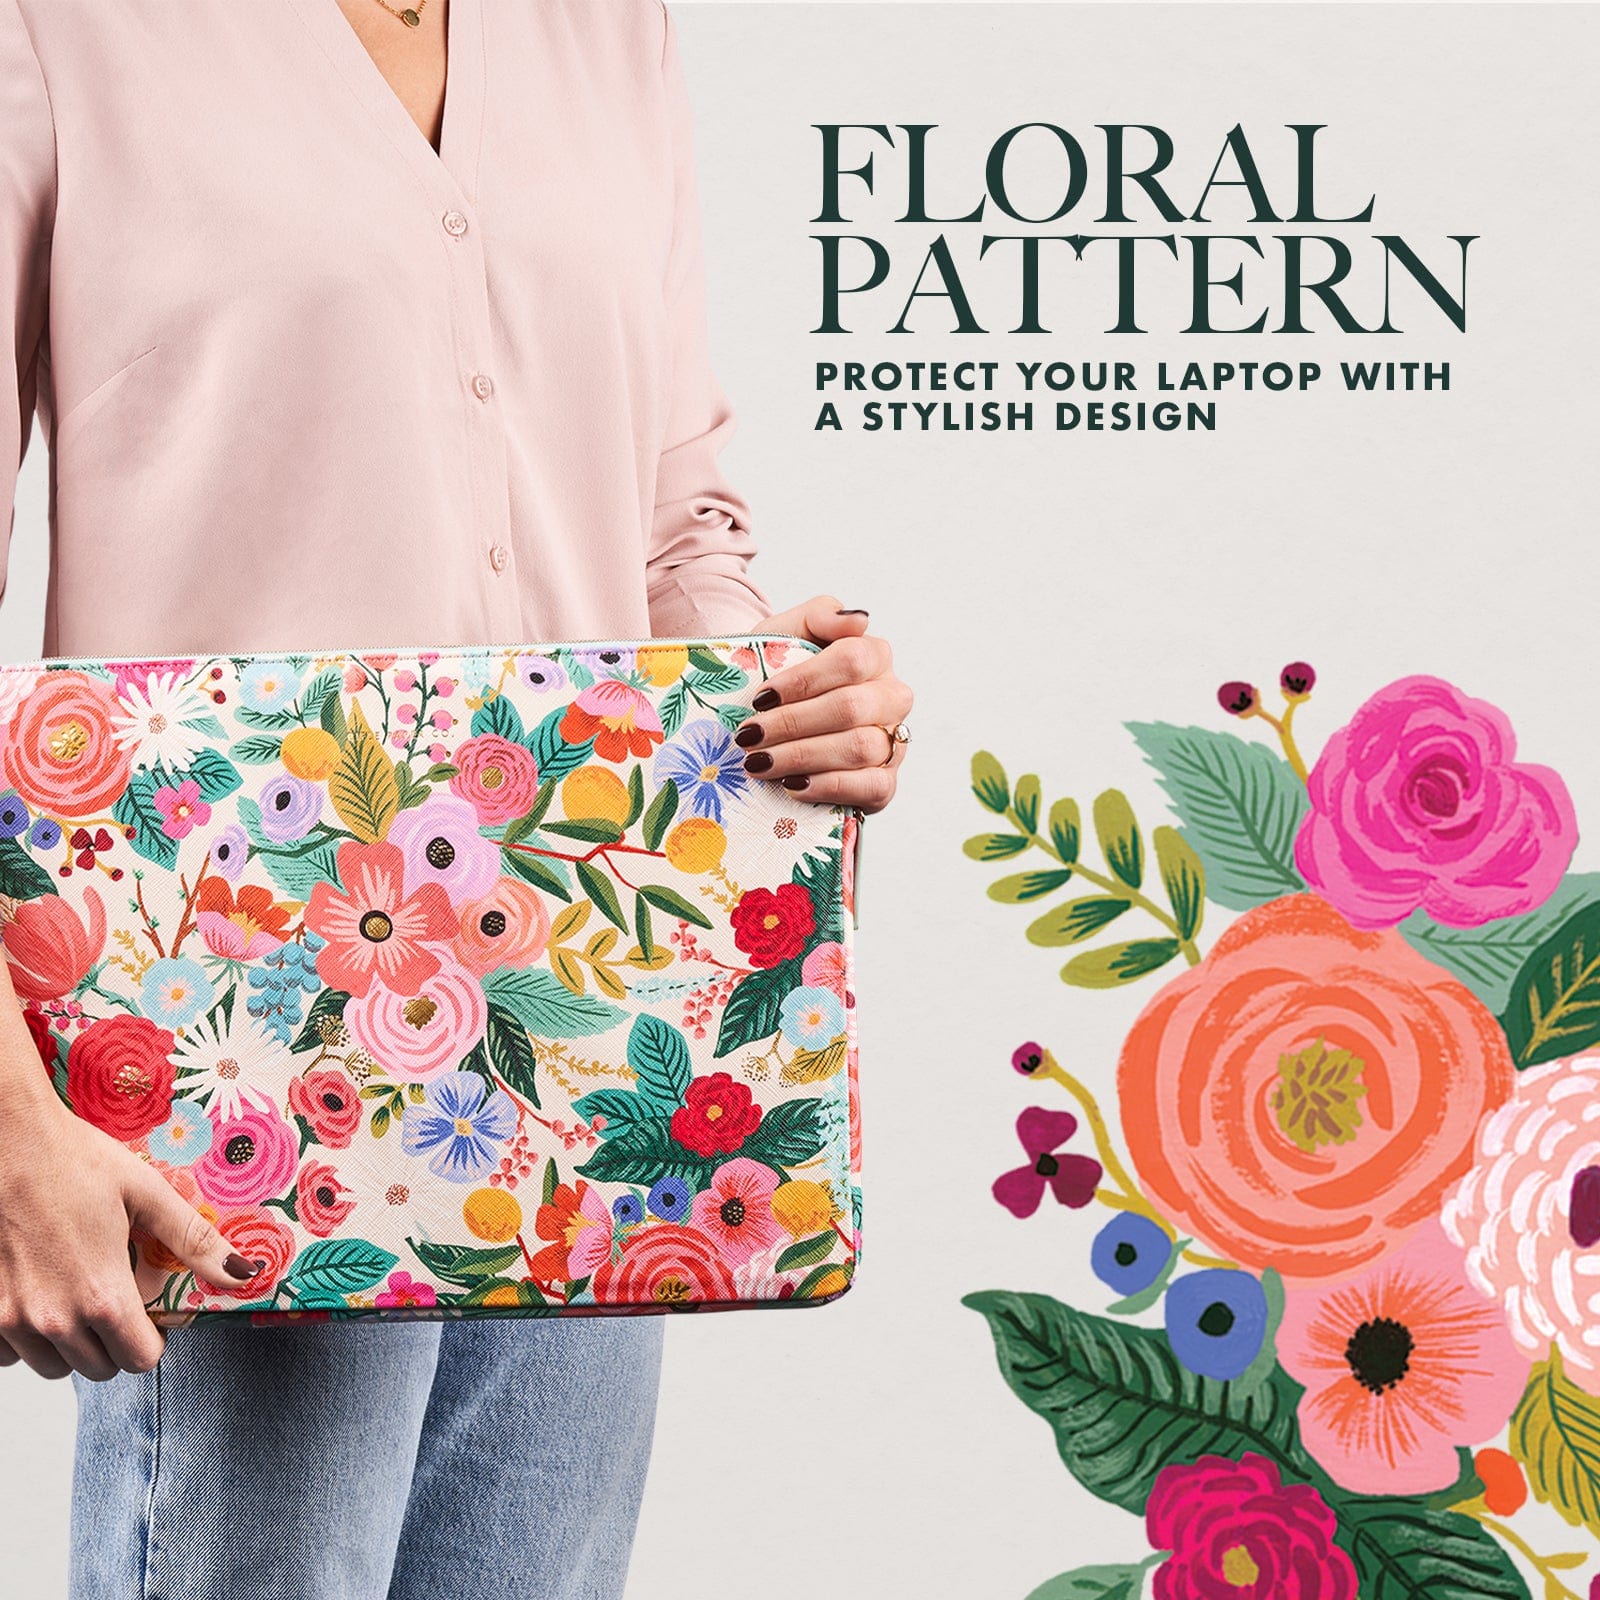 Floral Pattern. Protect your laptop with stylish design